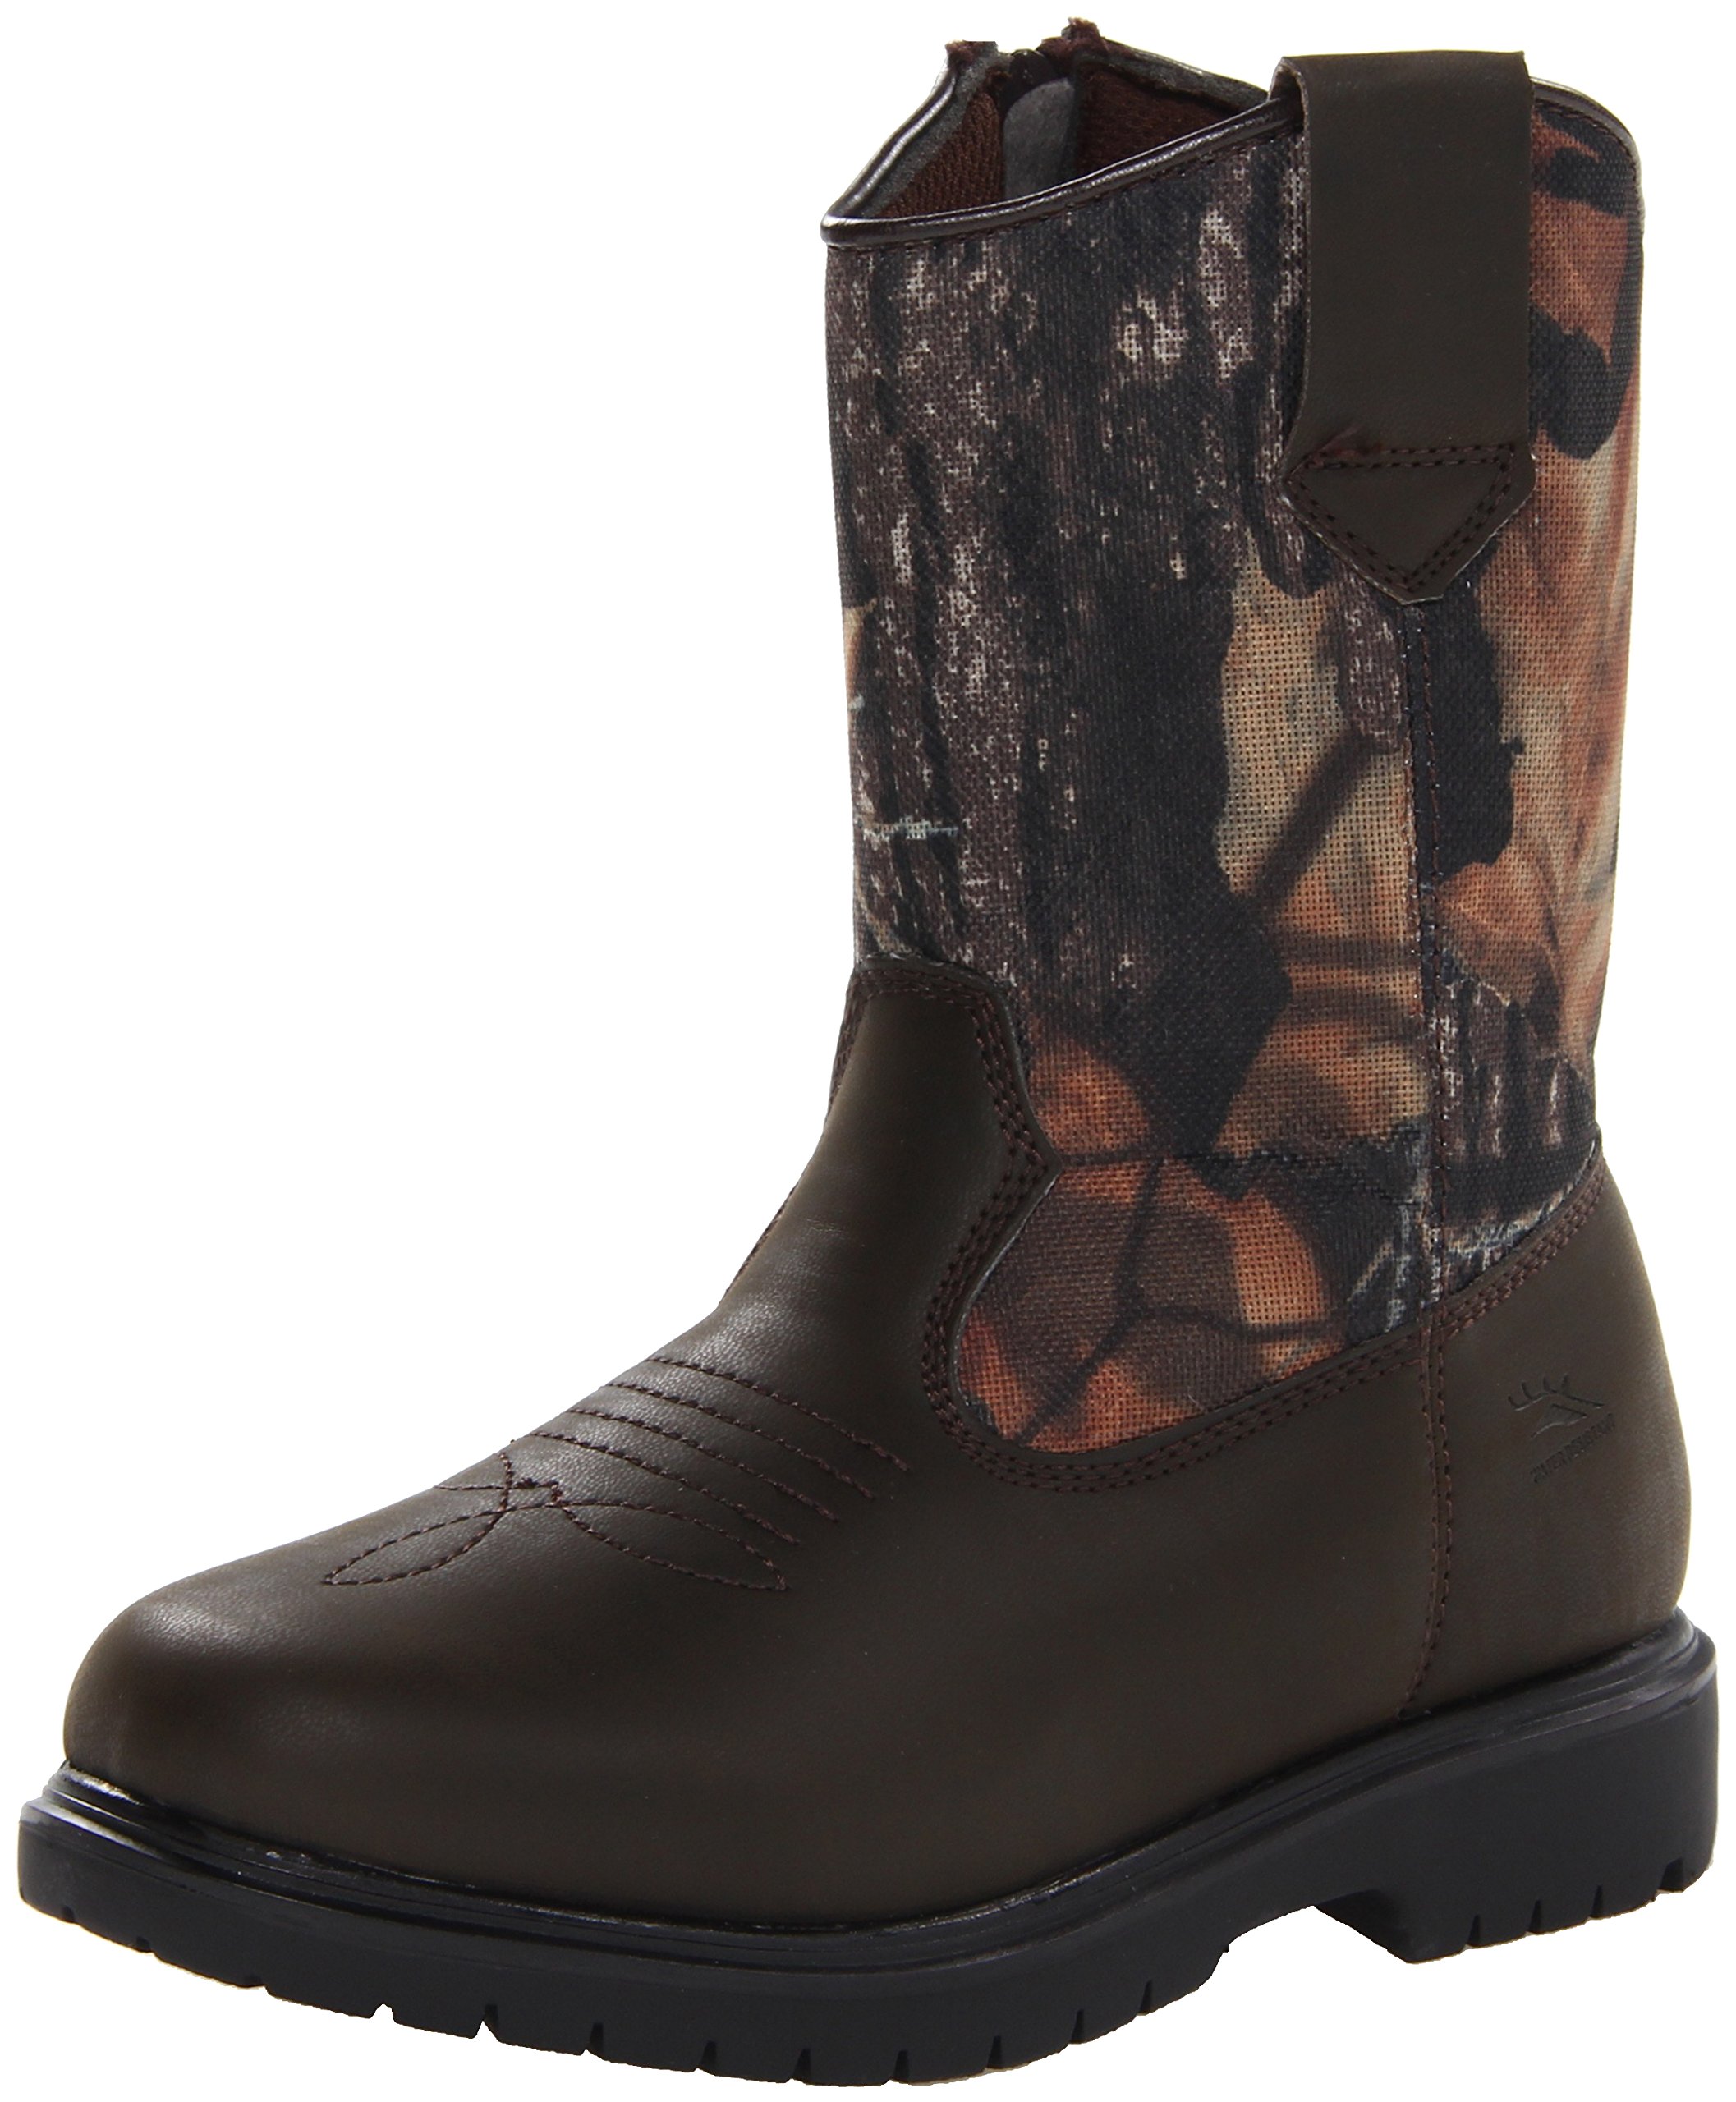 Deer Stags Kids Tour Thinsulate Water Resistant Pull On Boot (Little Kid/Big Kid)